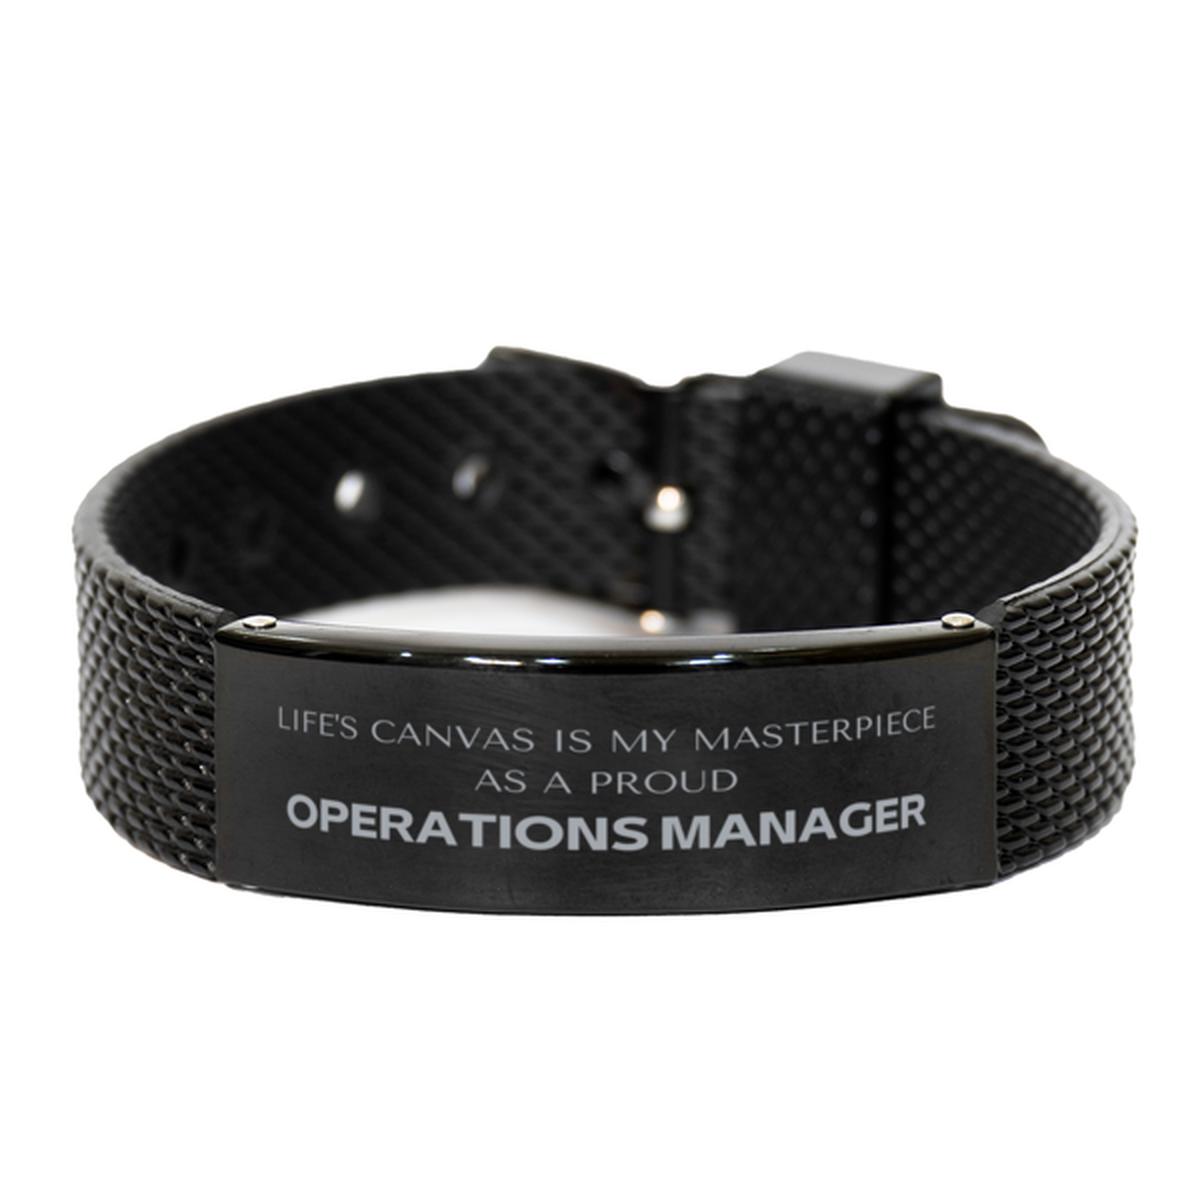 Proud Operations Manager Gifts, Life's canvas is my masterpiece, Epic Birthday Christmas Unique Black Shark Mesh Bracelet For Operations Manager, Coworkers, Men, Women, Friends